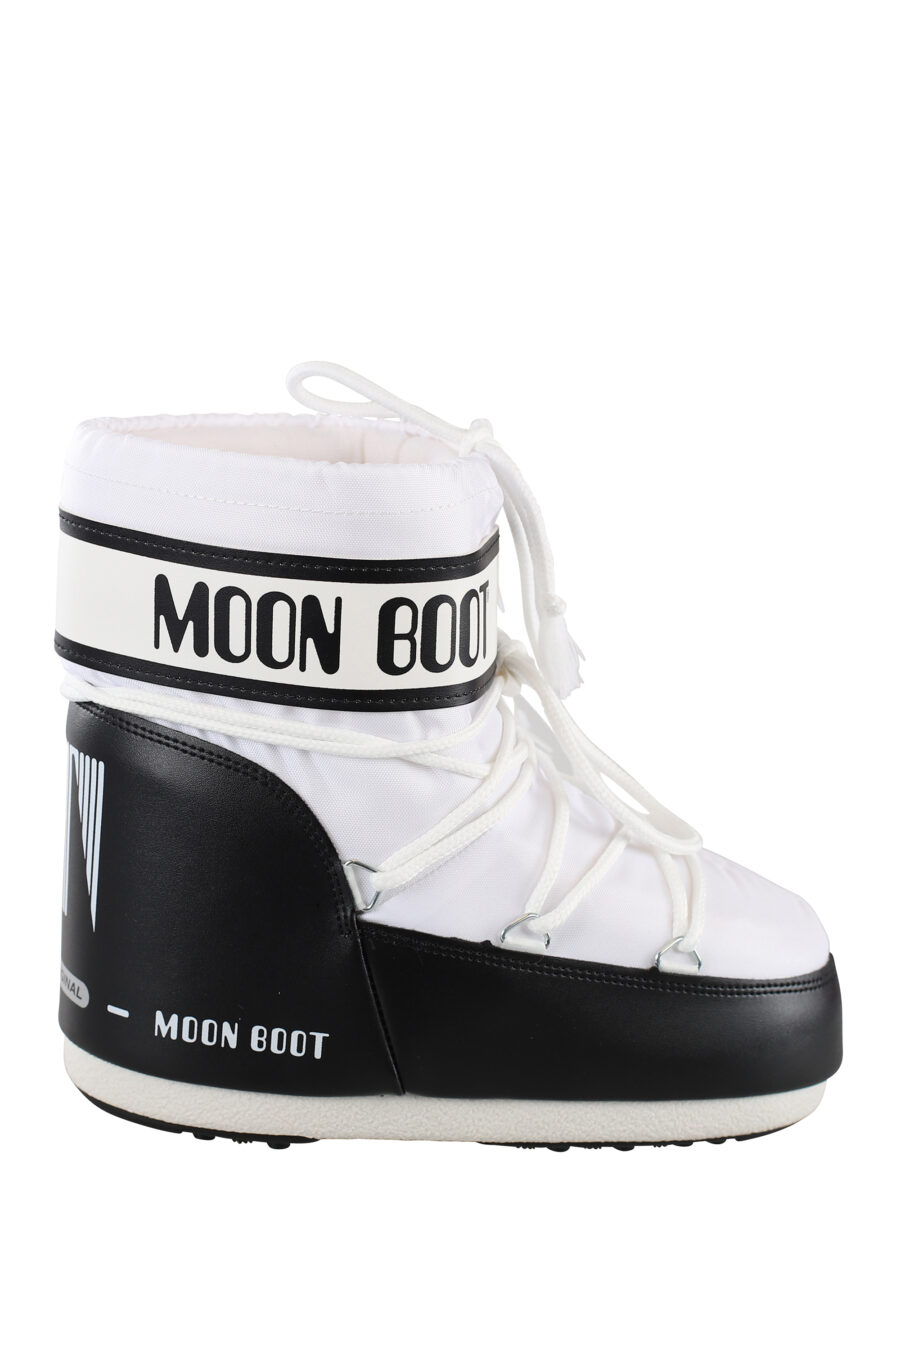 Two-tone black and white snow boots with black logo - IMG 6740